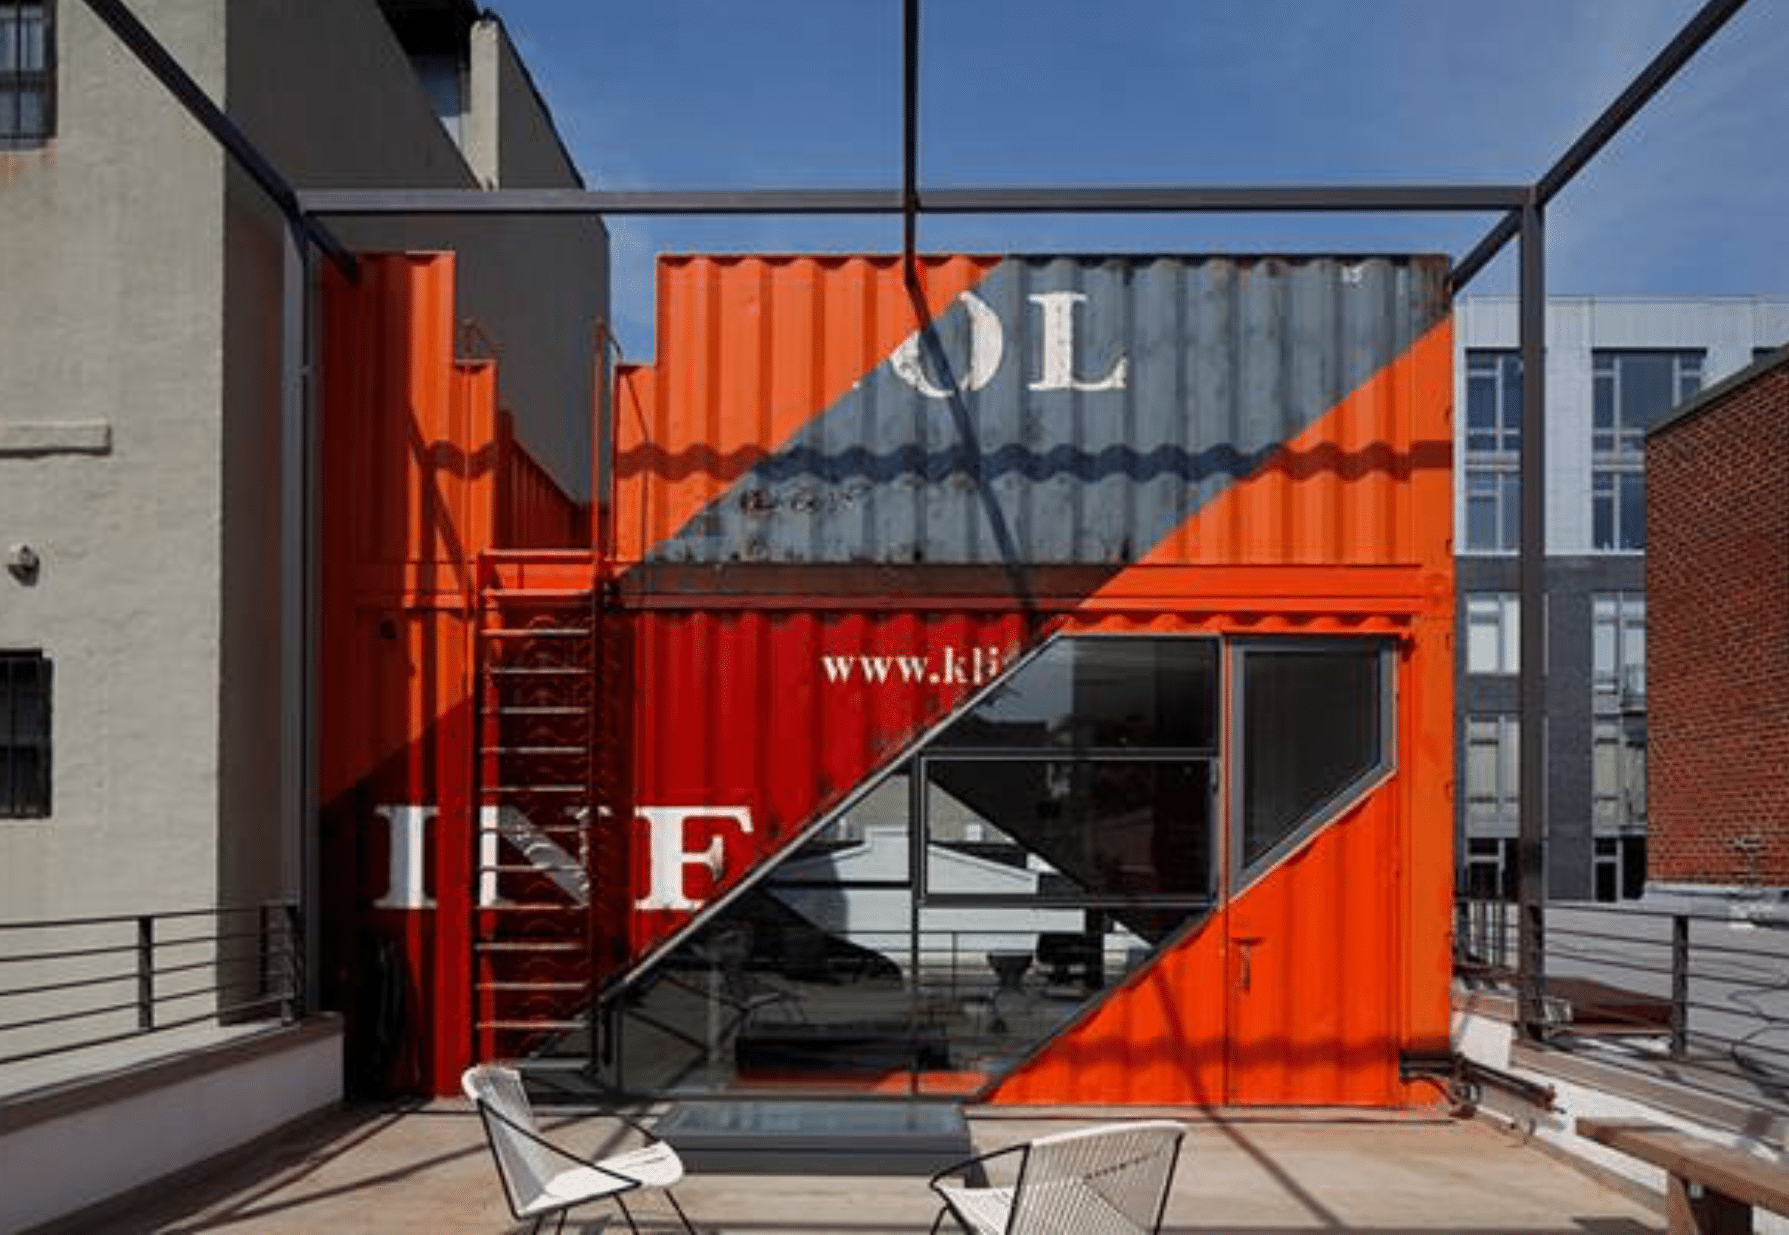 Eco-friendly start-up utiziling a Shipping Container Office